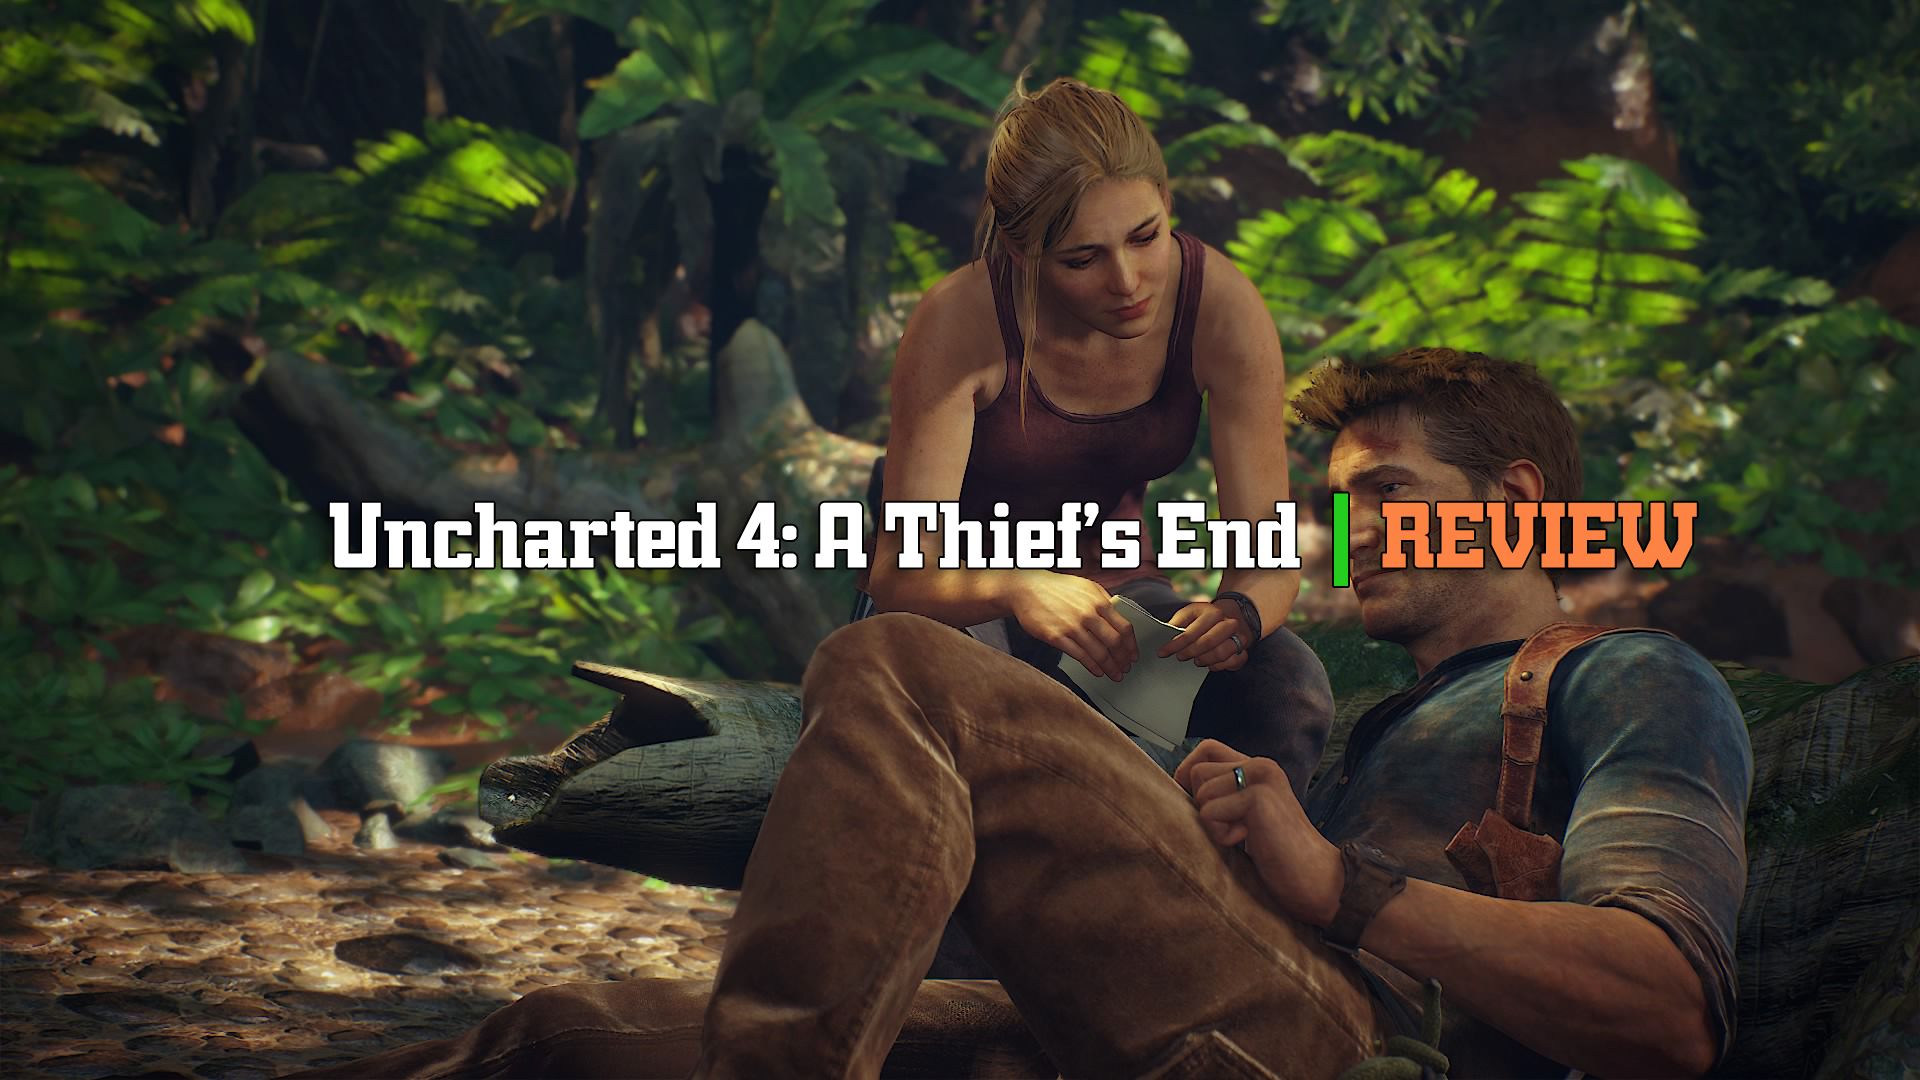 Uncharted 4: A Thief's End [2022] [PC] - Review - UNCHARTED